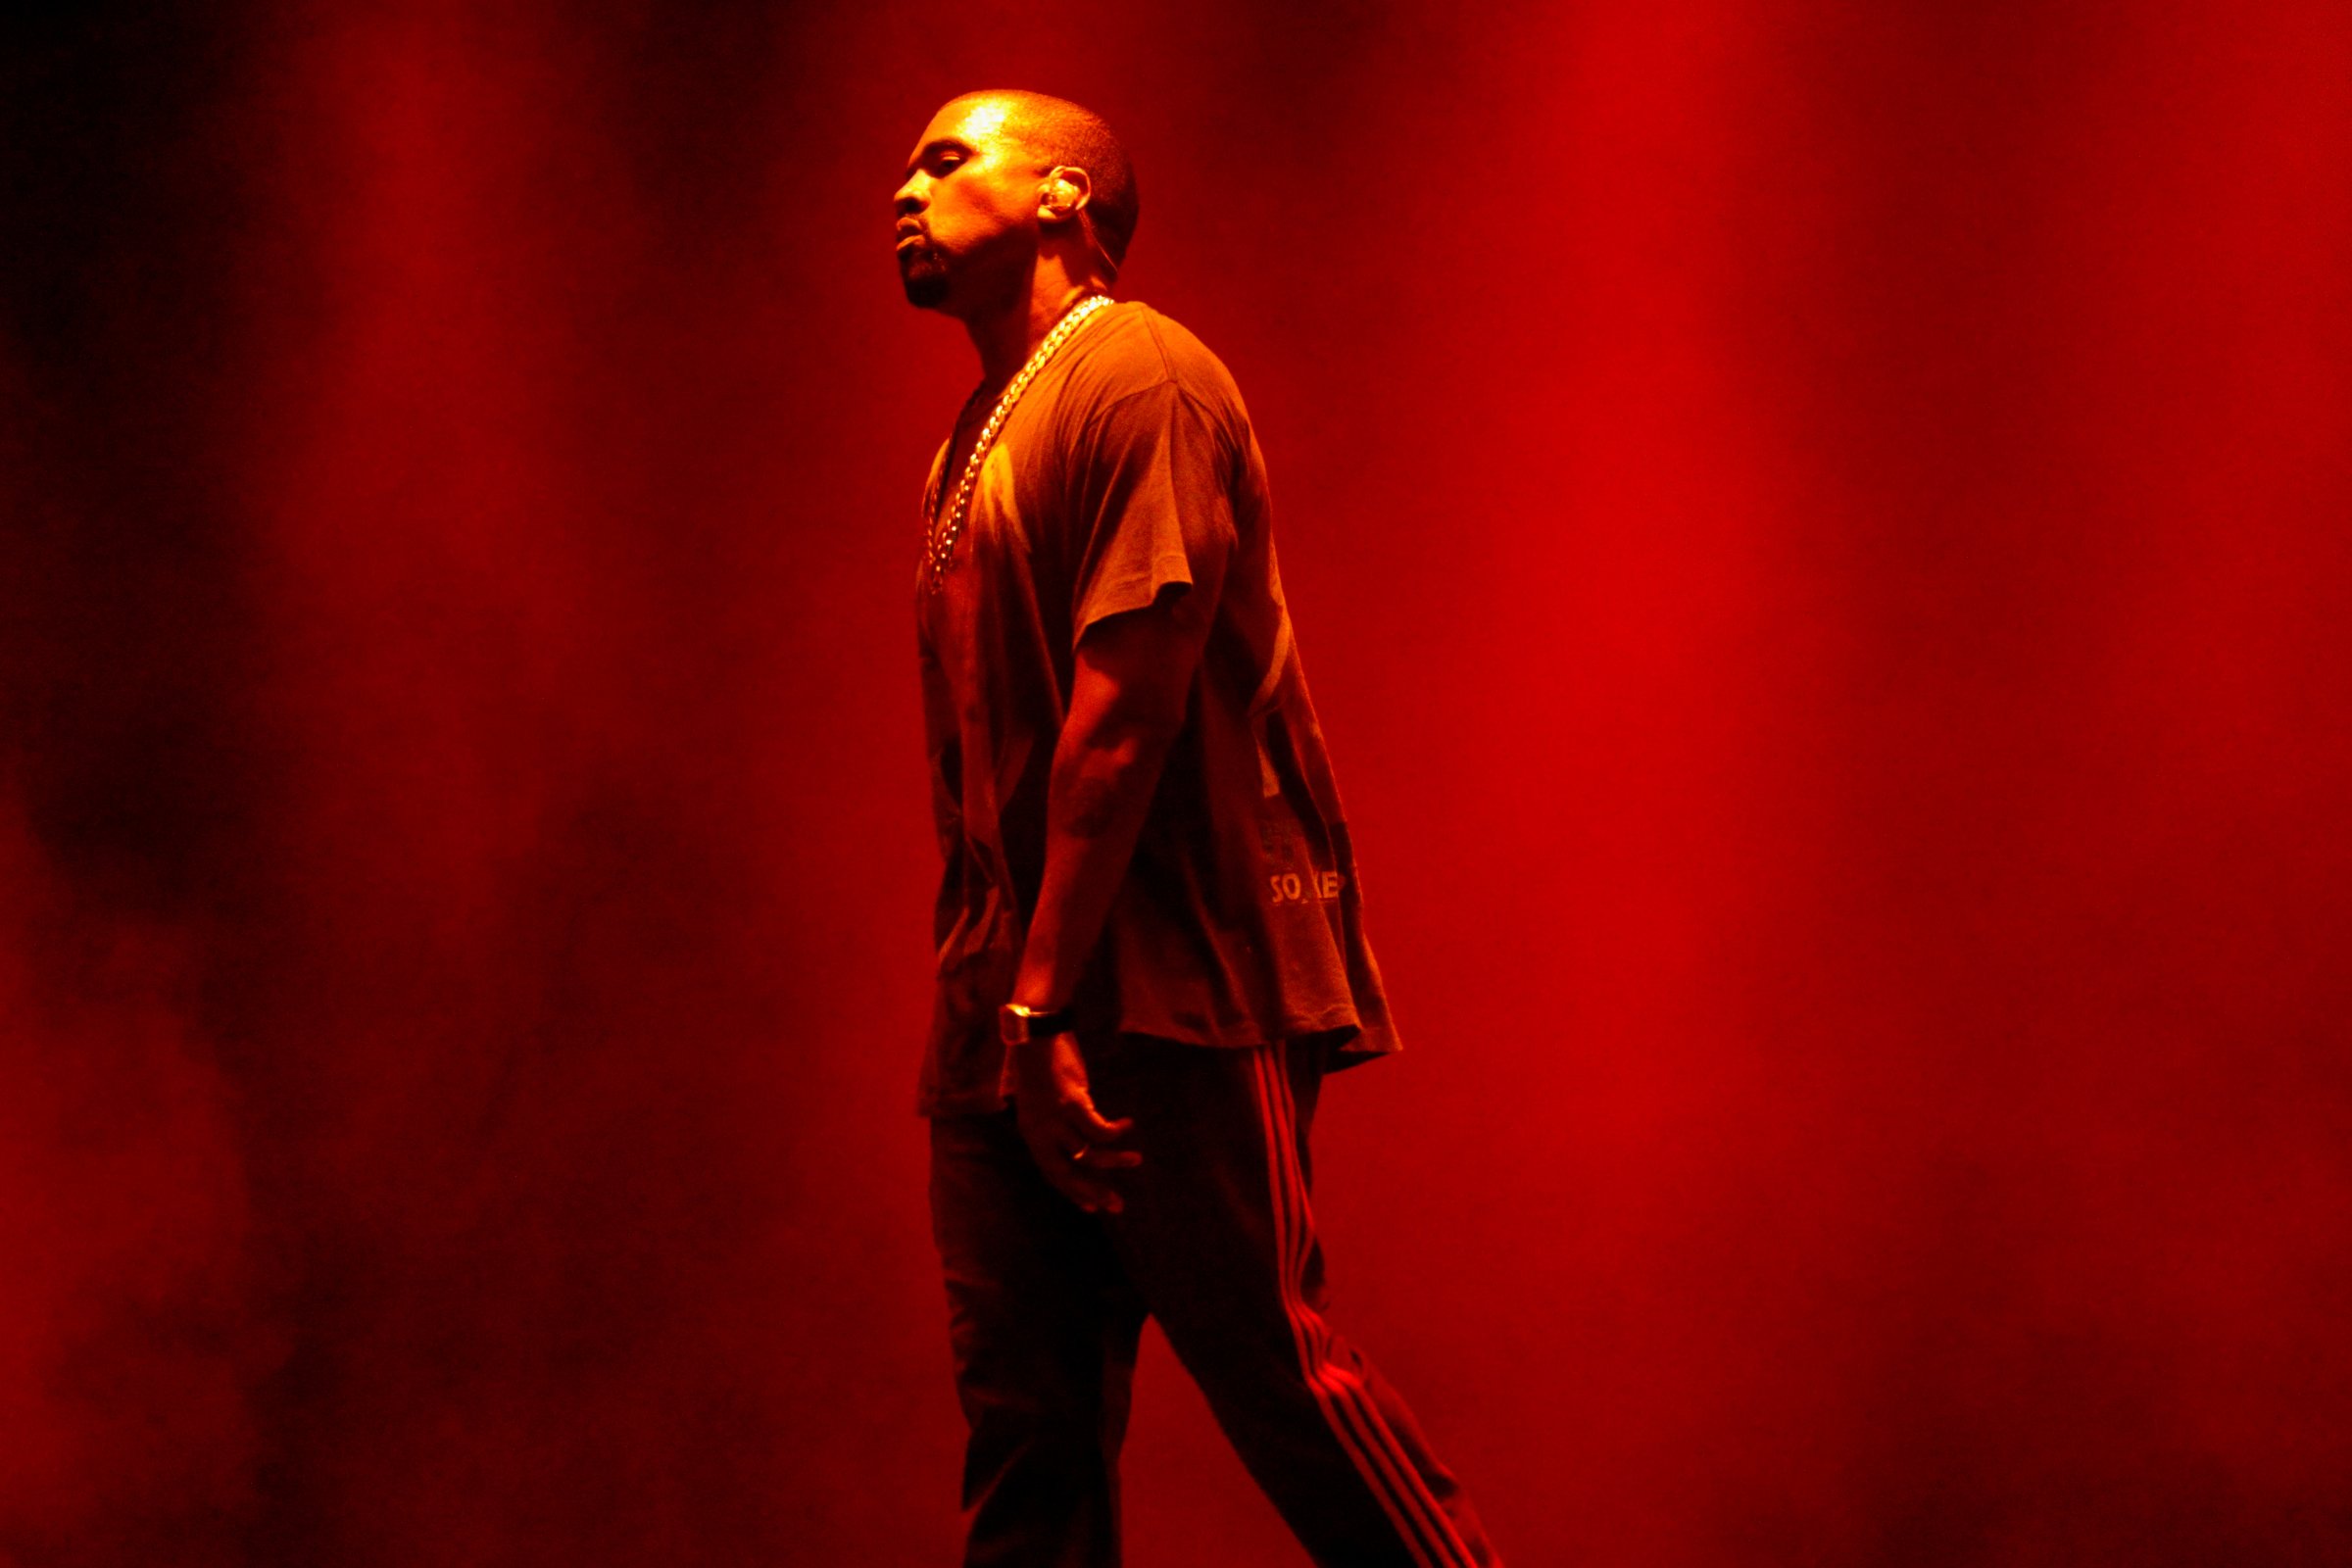 Recording Artist Kanye West performs onstage during The Meadows Music & Arts Festival Day 2 on October 2, 2016 in Queens, New York.